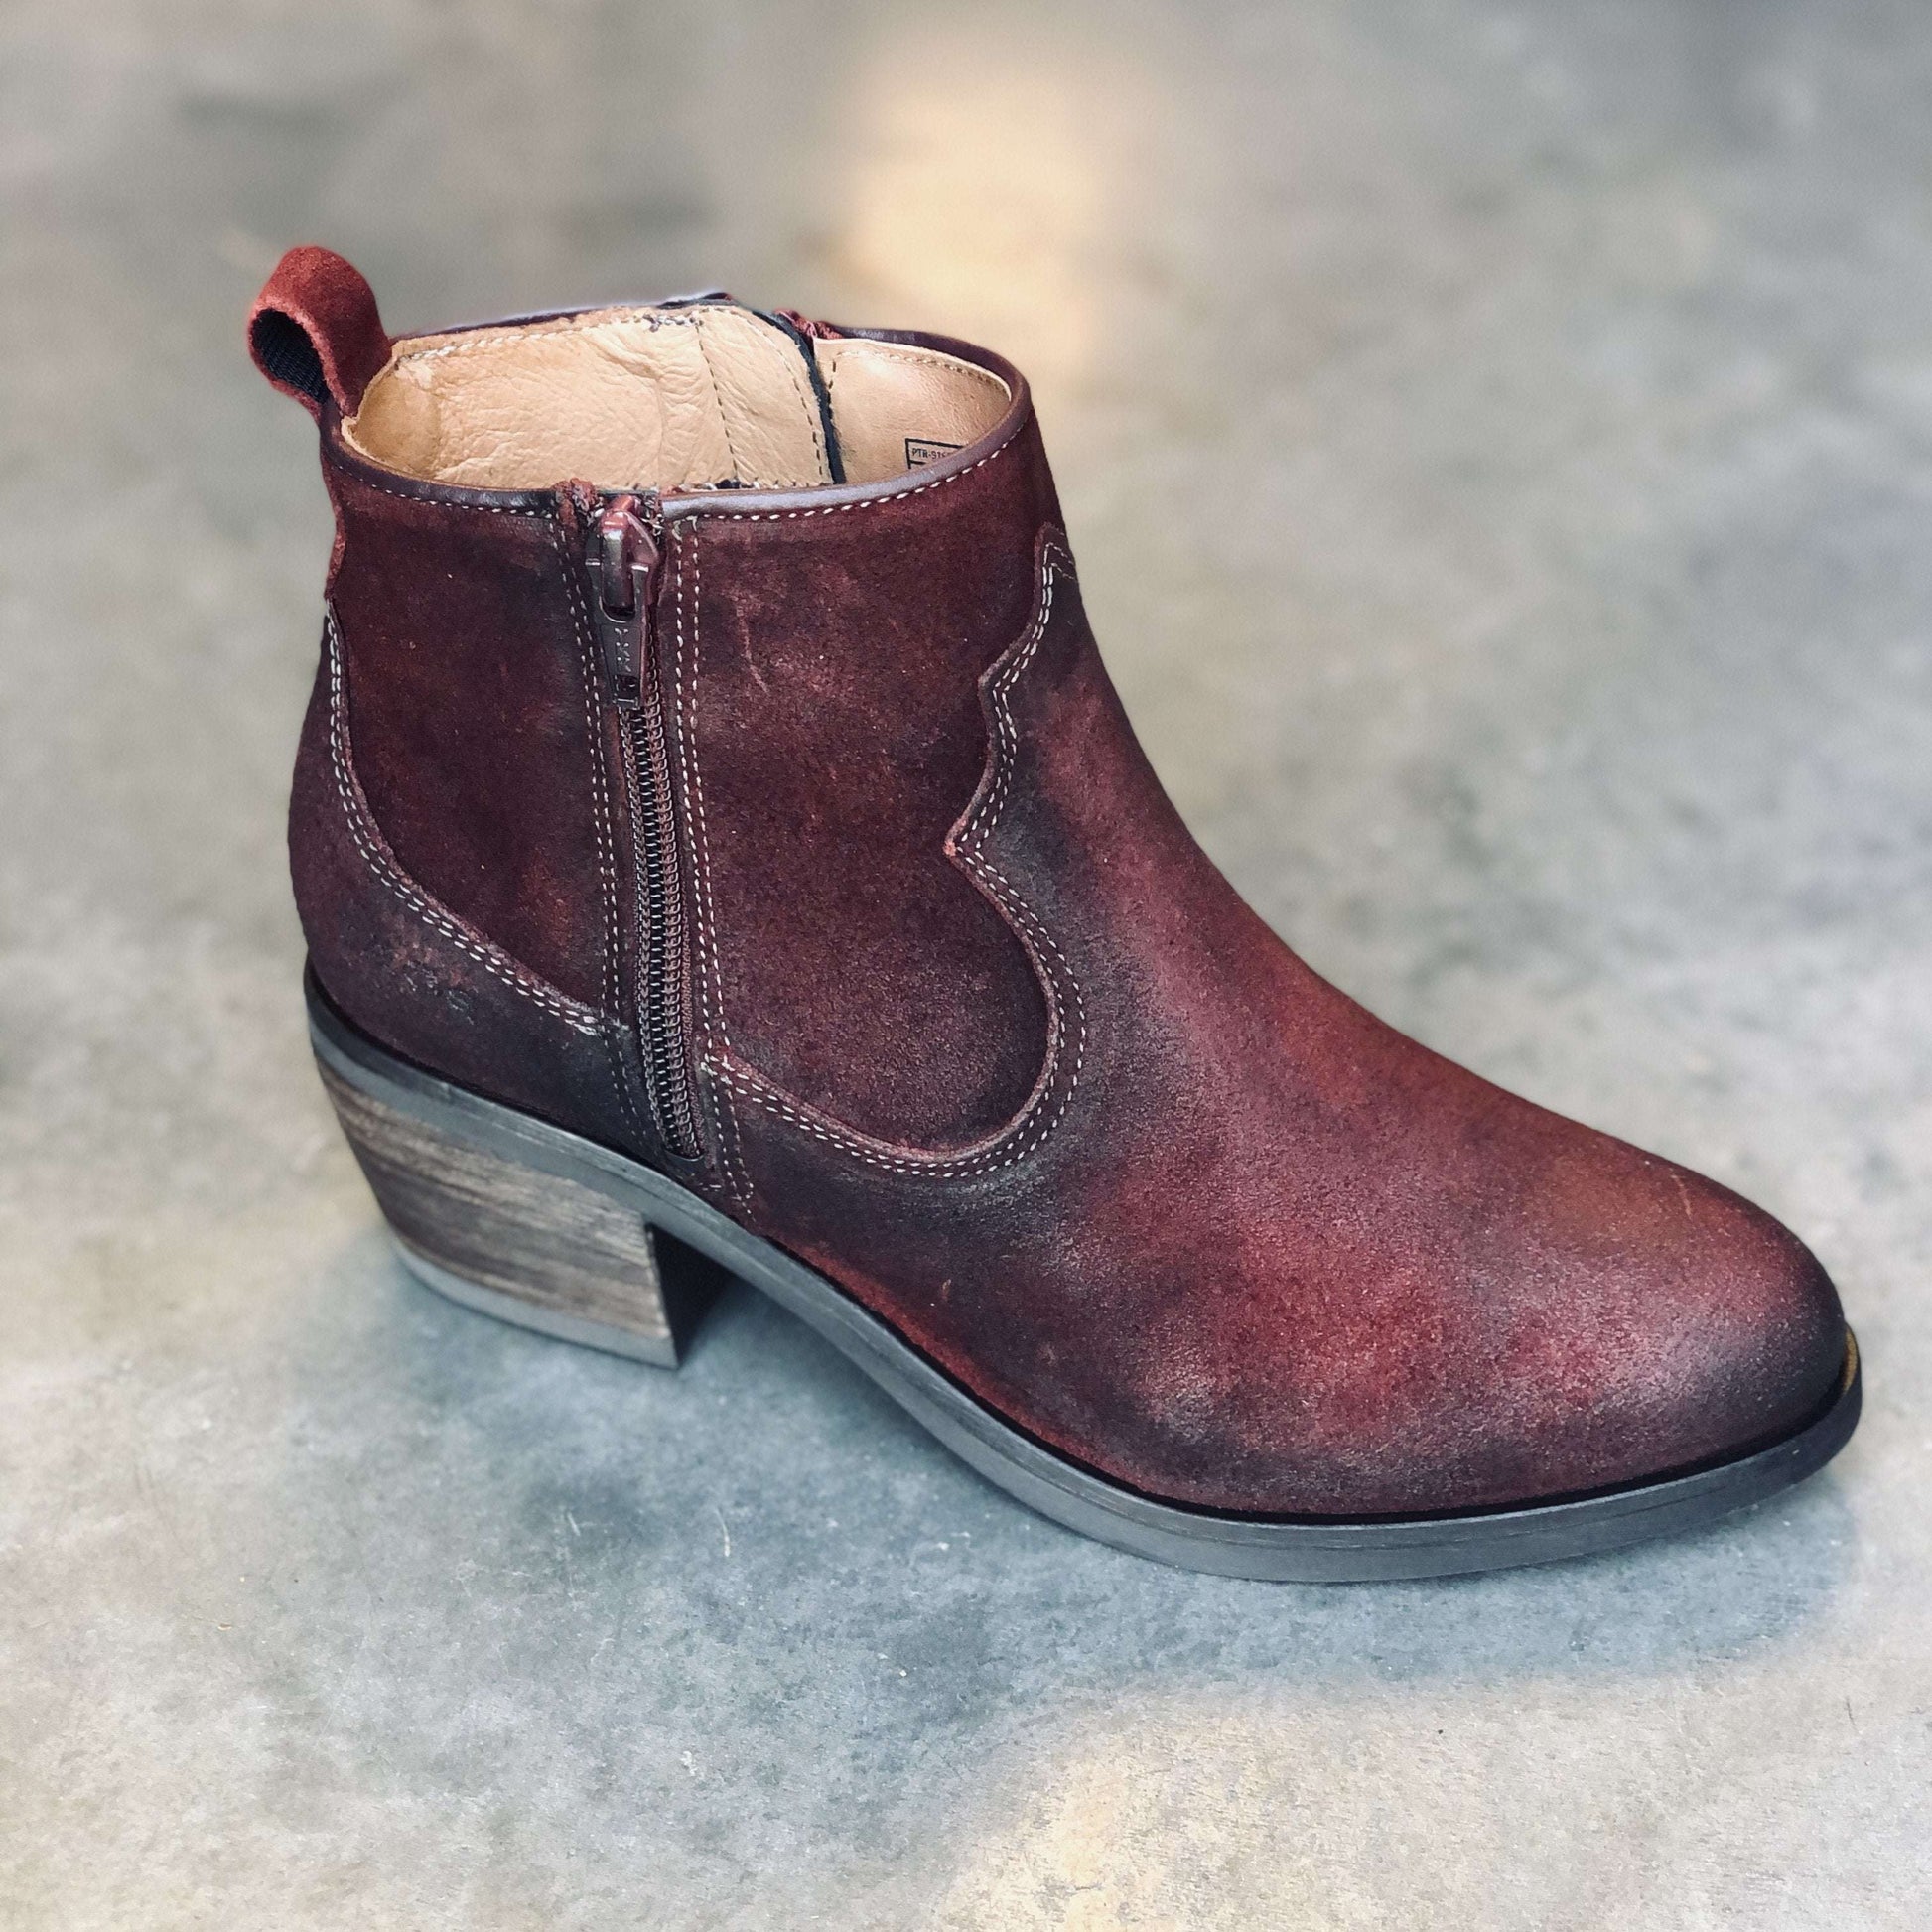 [Taos- Partner Suede Ankle Boot], [Clearance], [TAOS], [Plum Bottom].